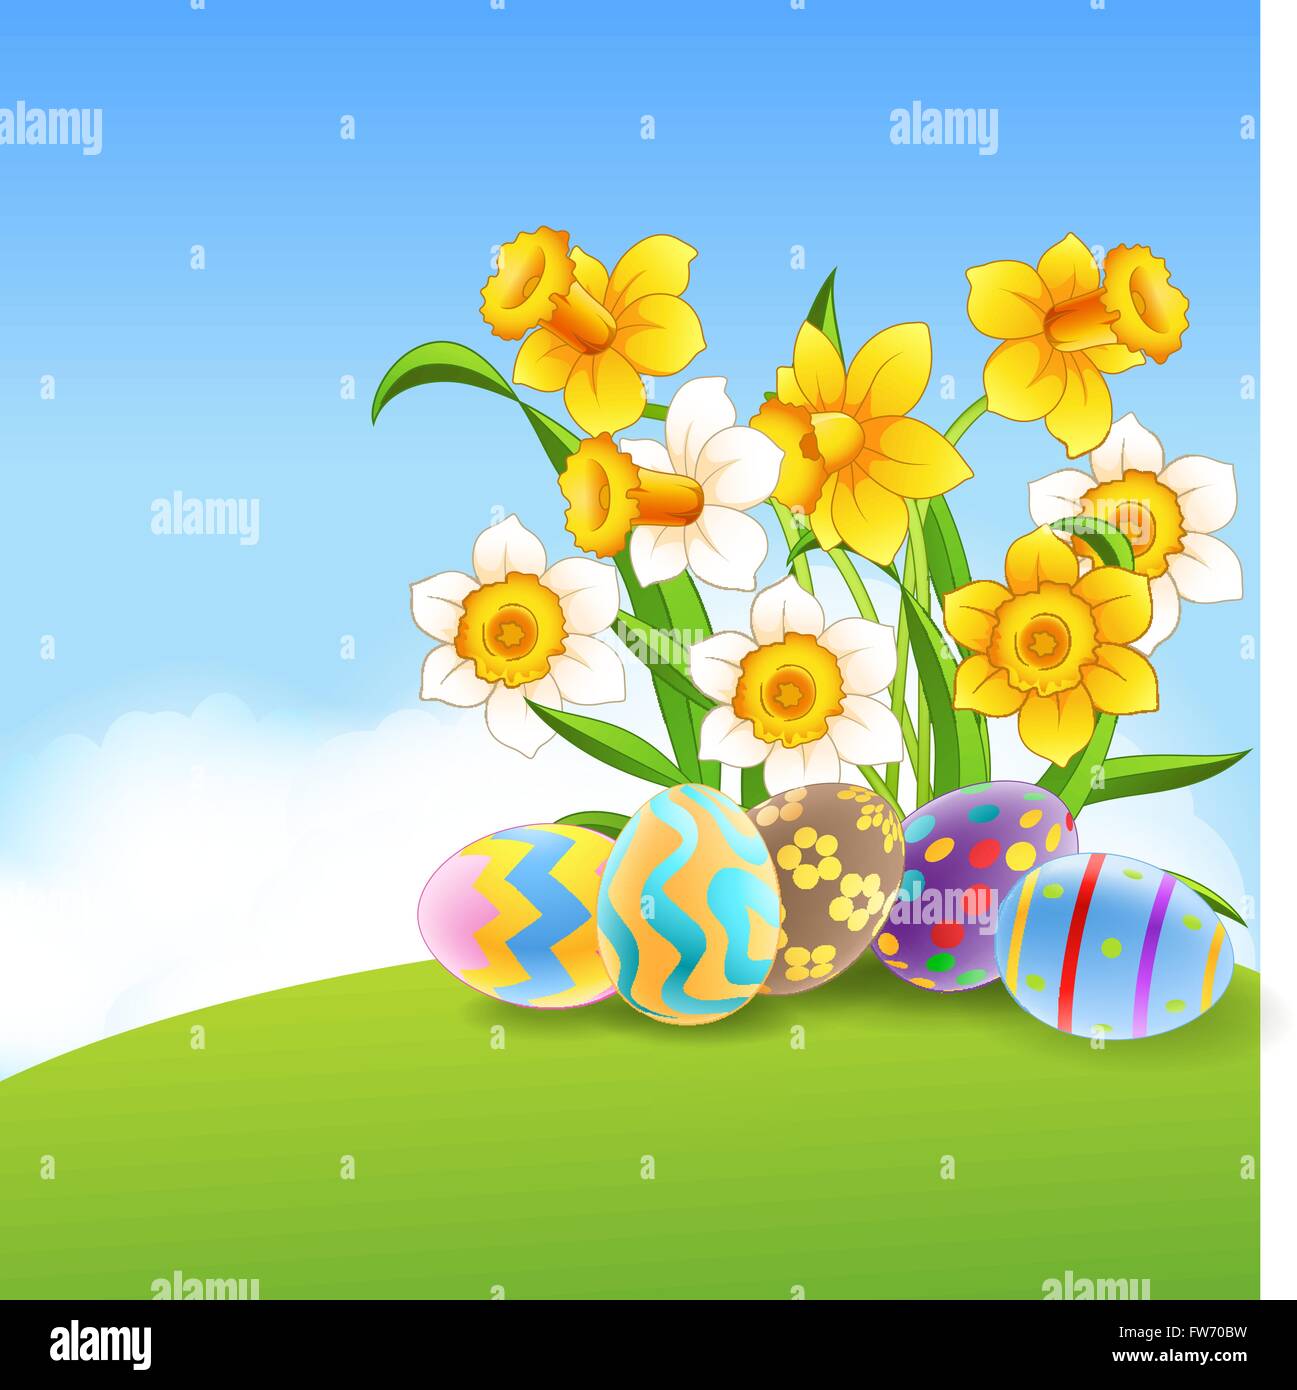 Illustration of colorful Easter eggs Stock Vector